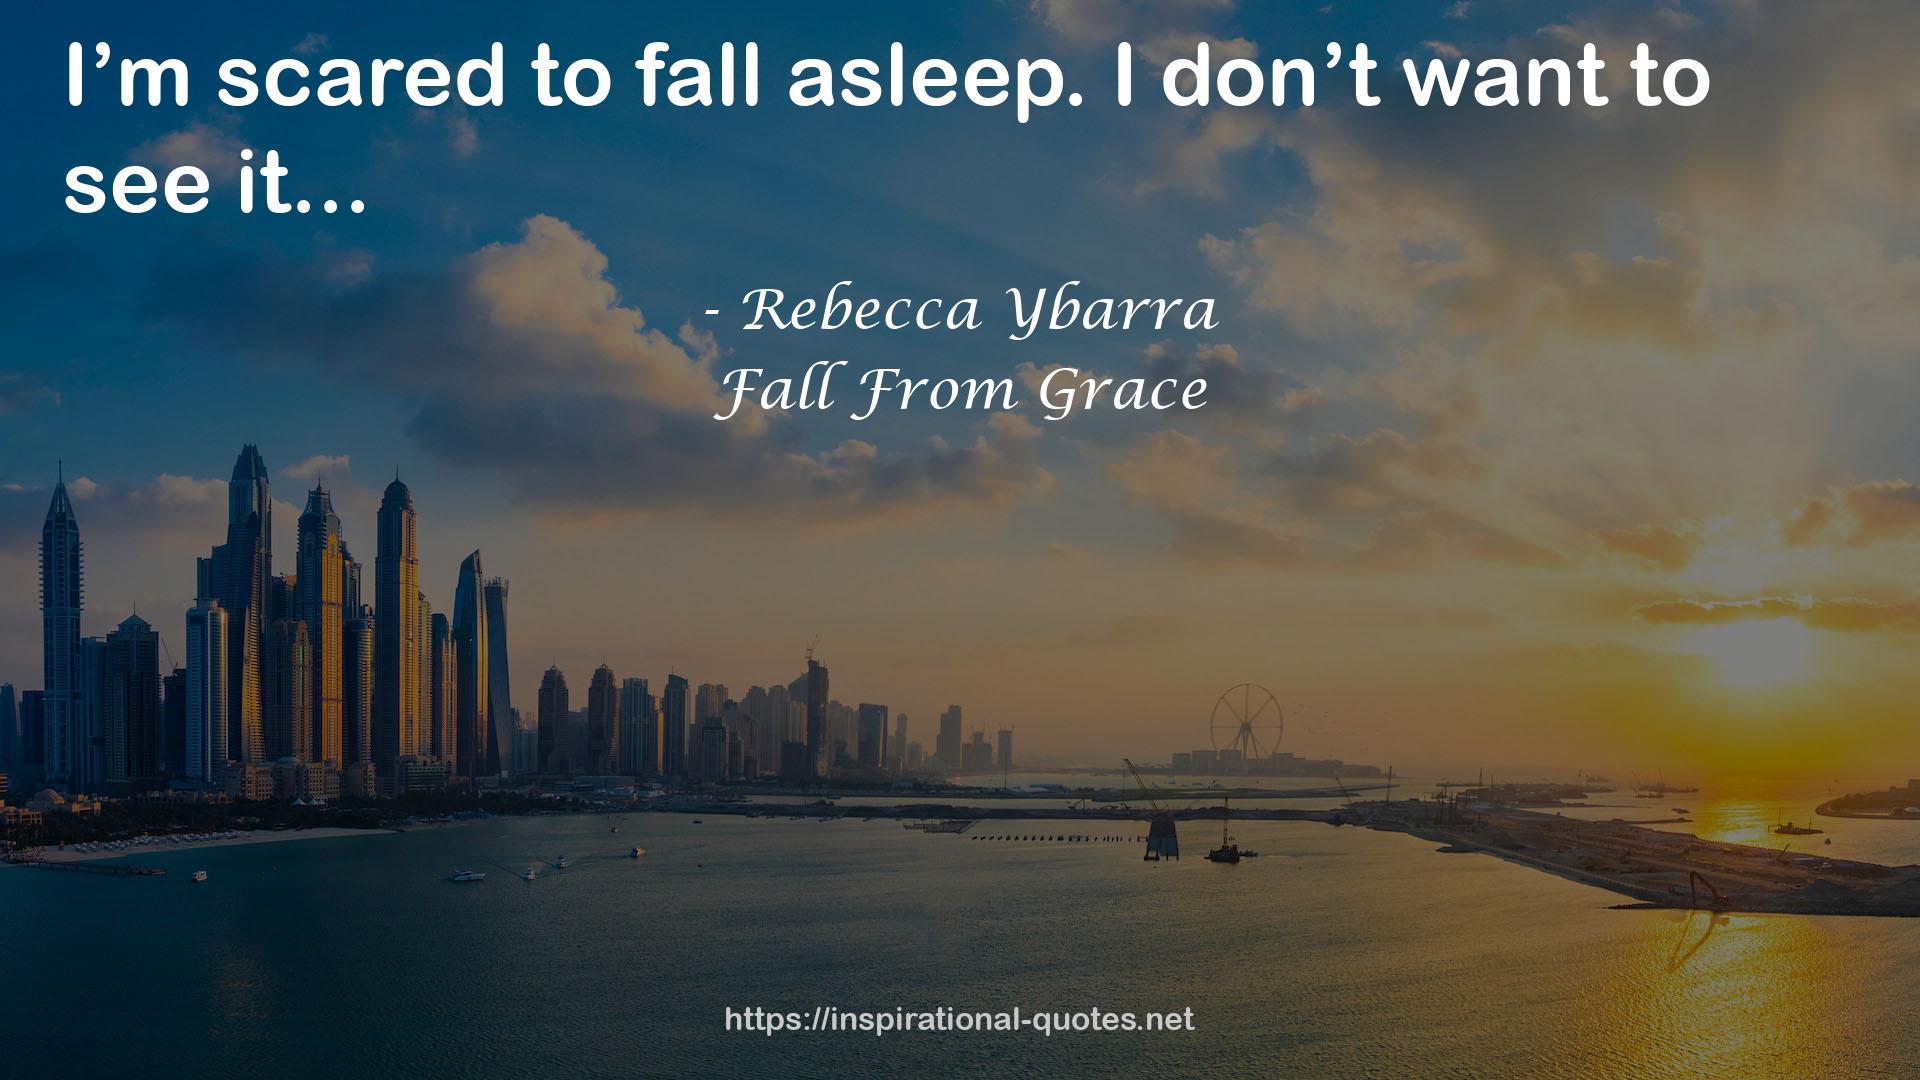 Fall From Grace QUOTES